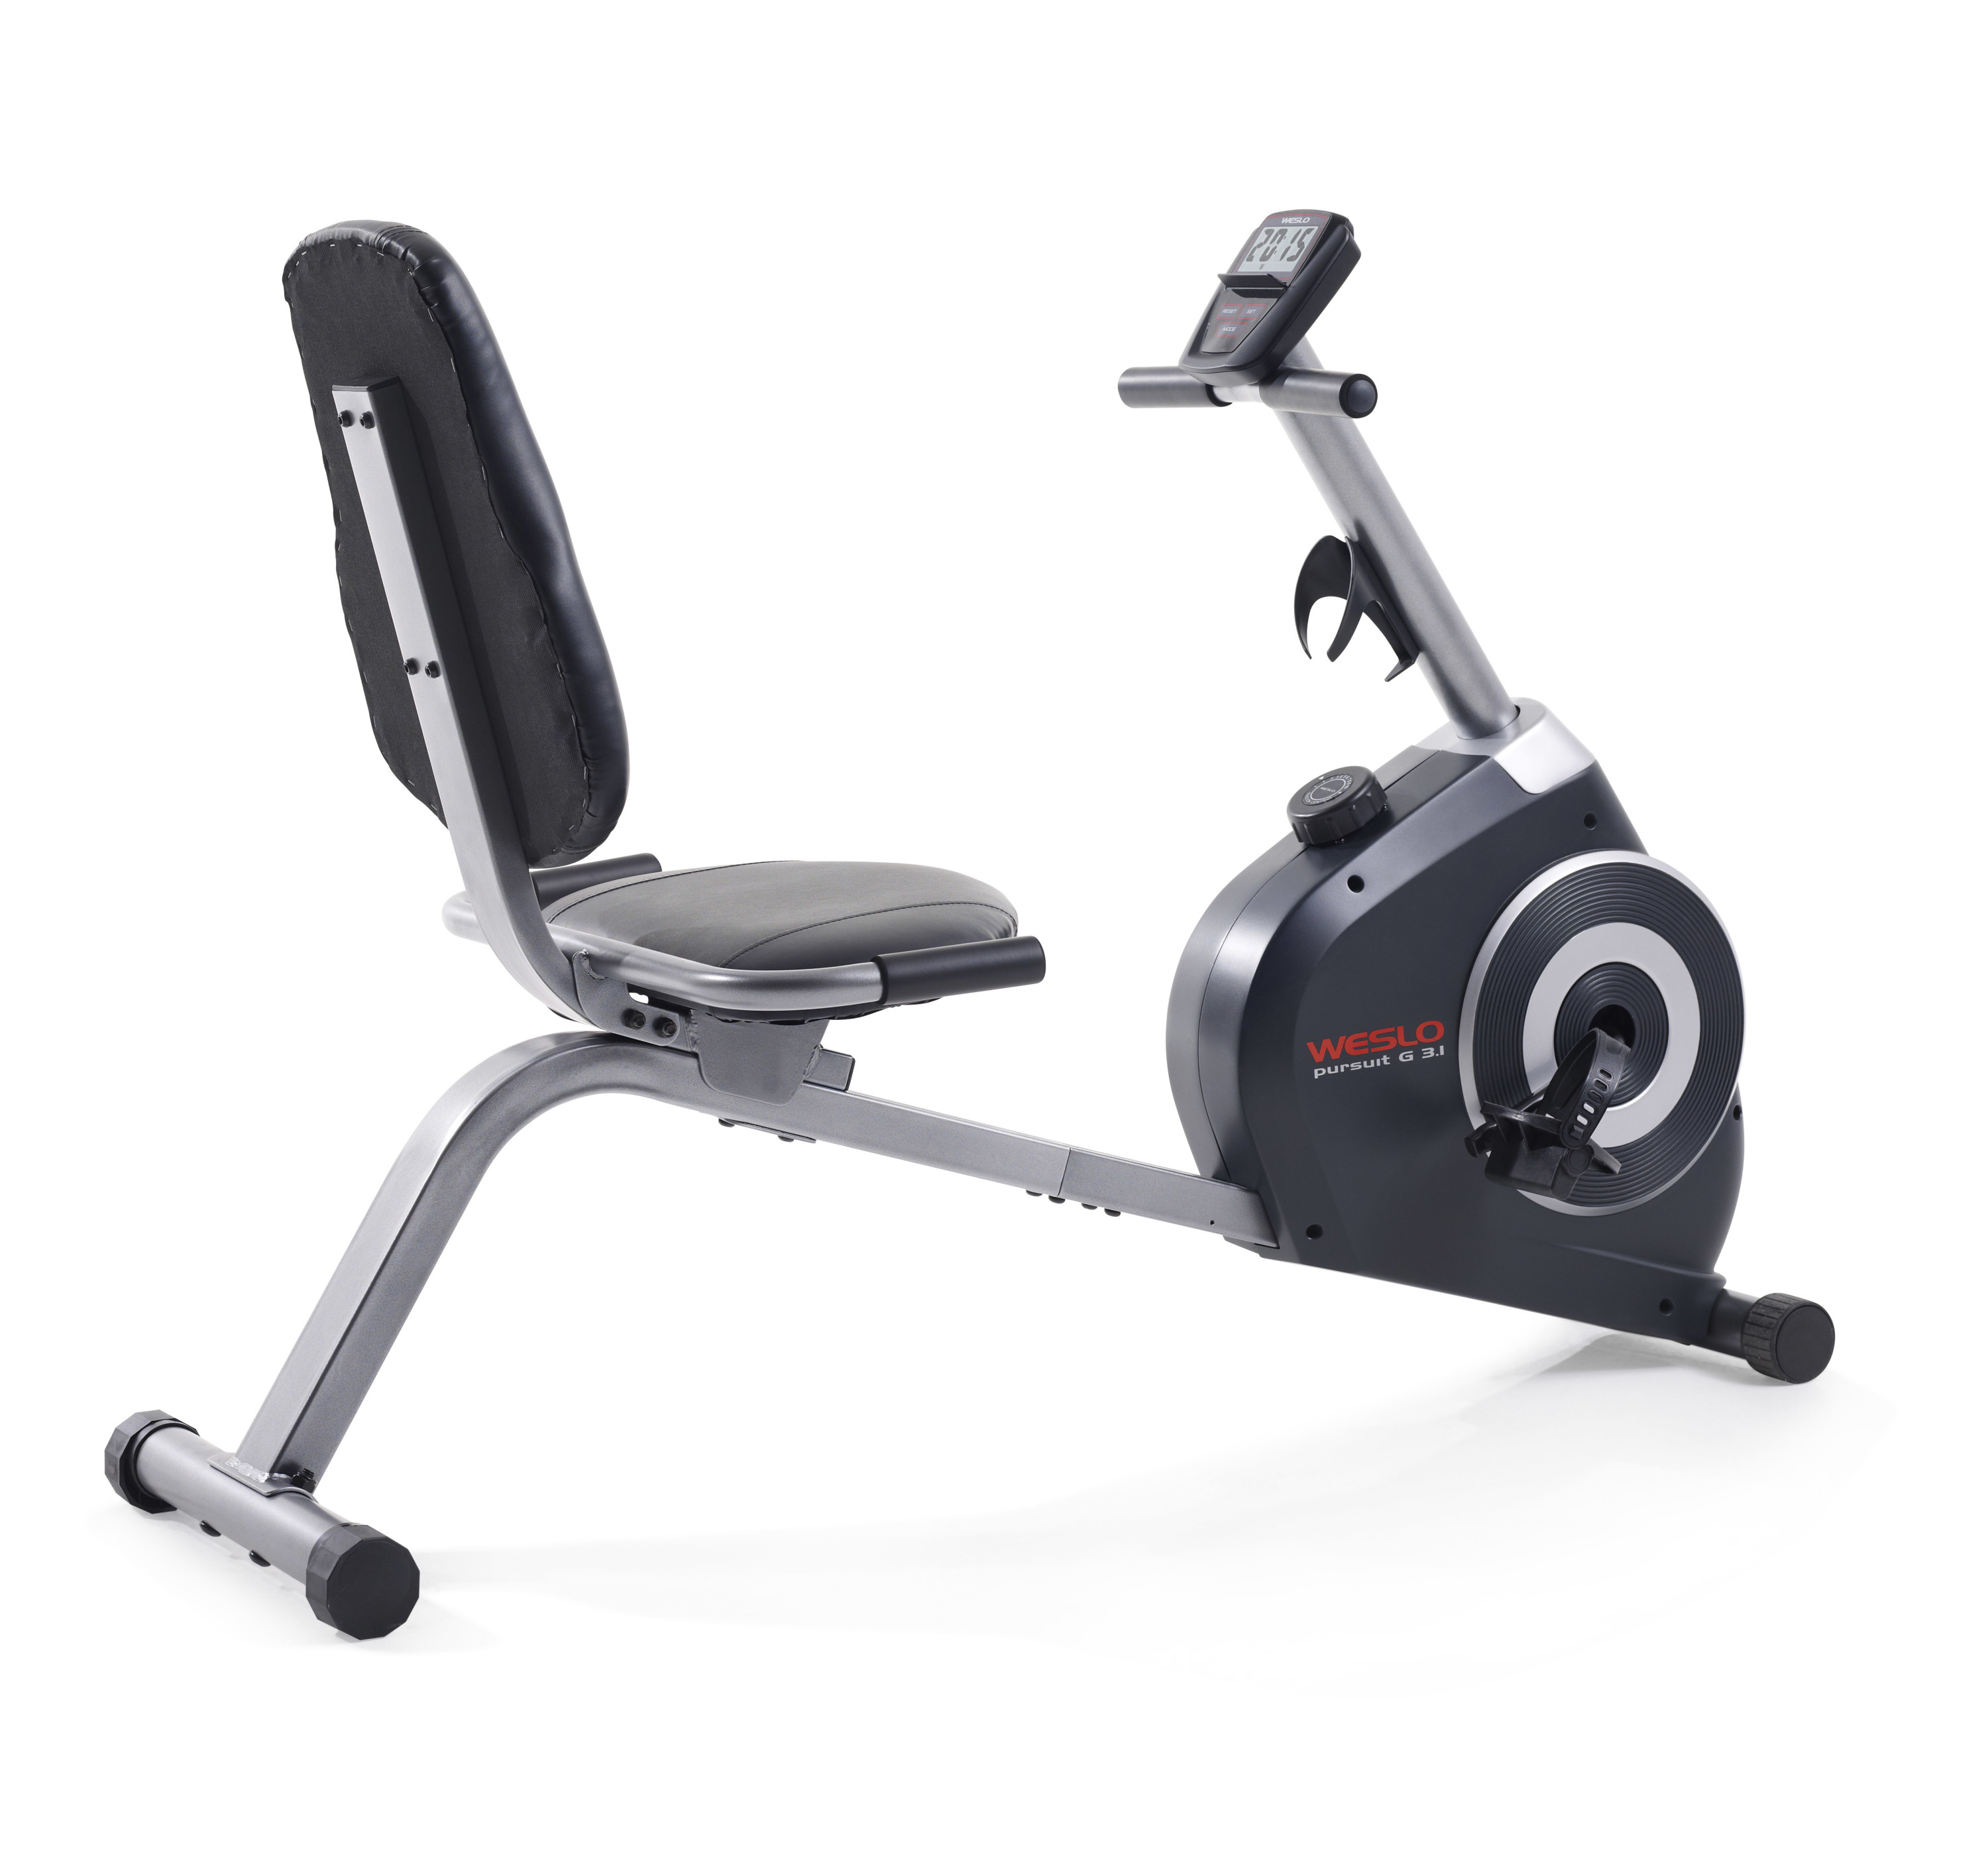 Freemotion 335r Recumbent Exercise Bike With Ifit Compatible Console 30 Workout Apps Dealepic We make exercise machines that change your mood, mind and fitness level. dealepic